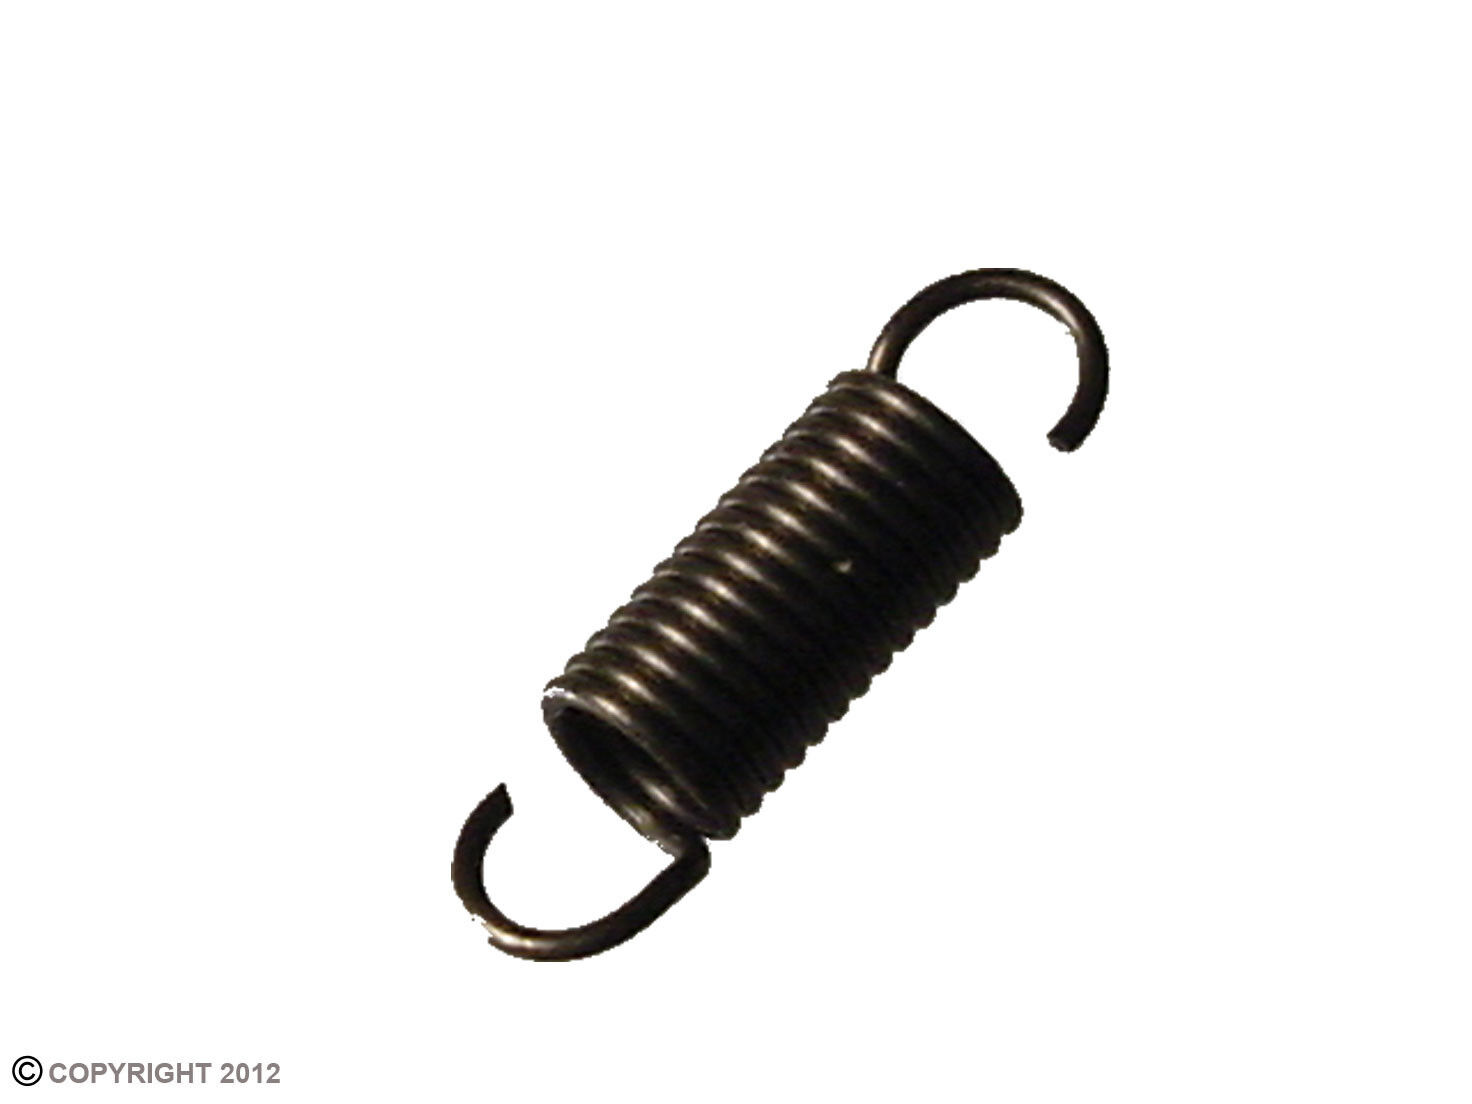 GHOST X Power Trigger Spring Competition for Glock 6lb GEN 1-4 17 19 20 21 22 23